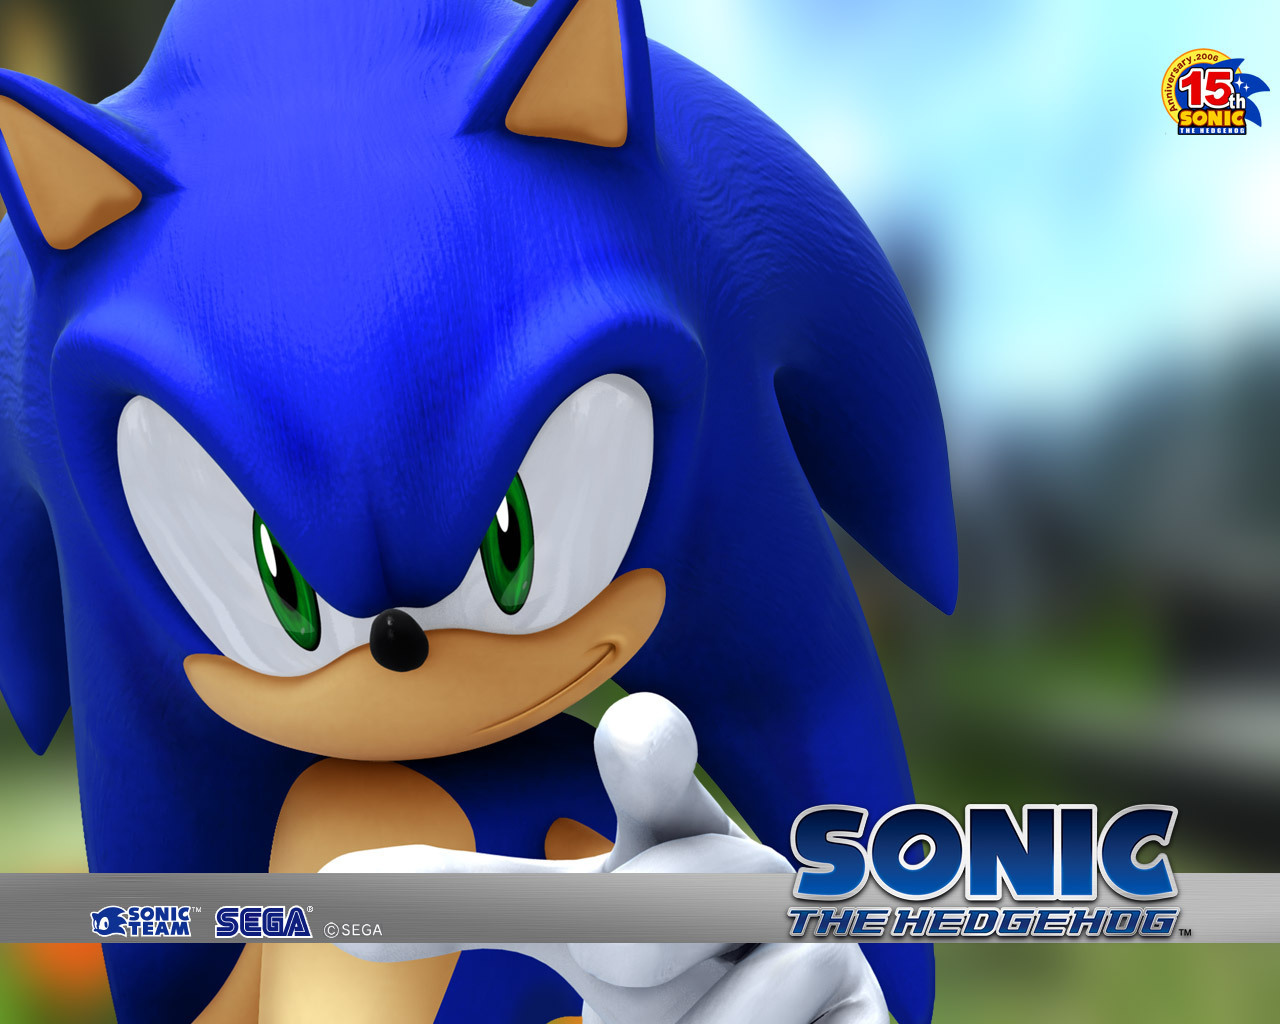 sonic characters wallpaper,cartoon,sonic the hedgehog,animated cartoon,fictional character,games